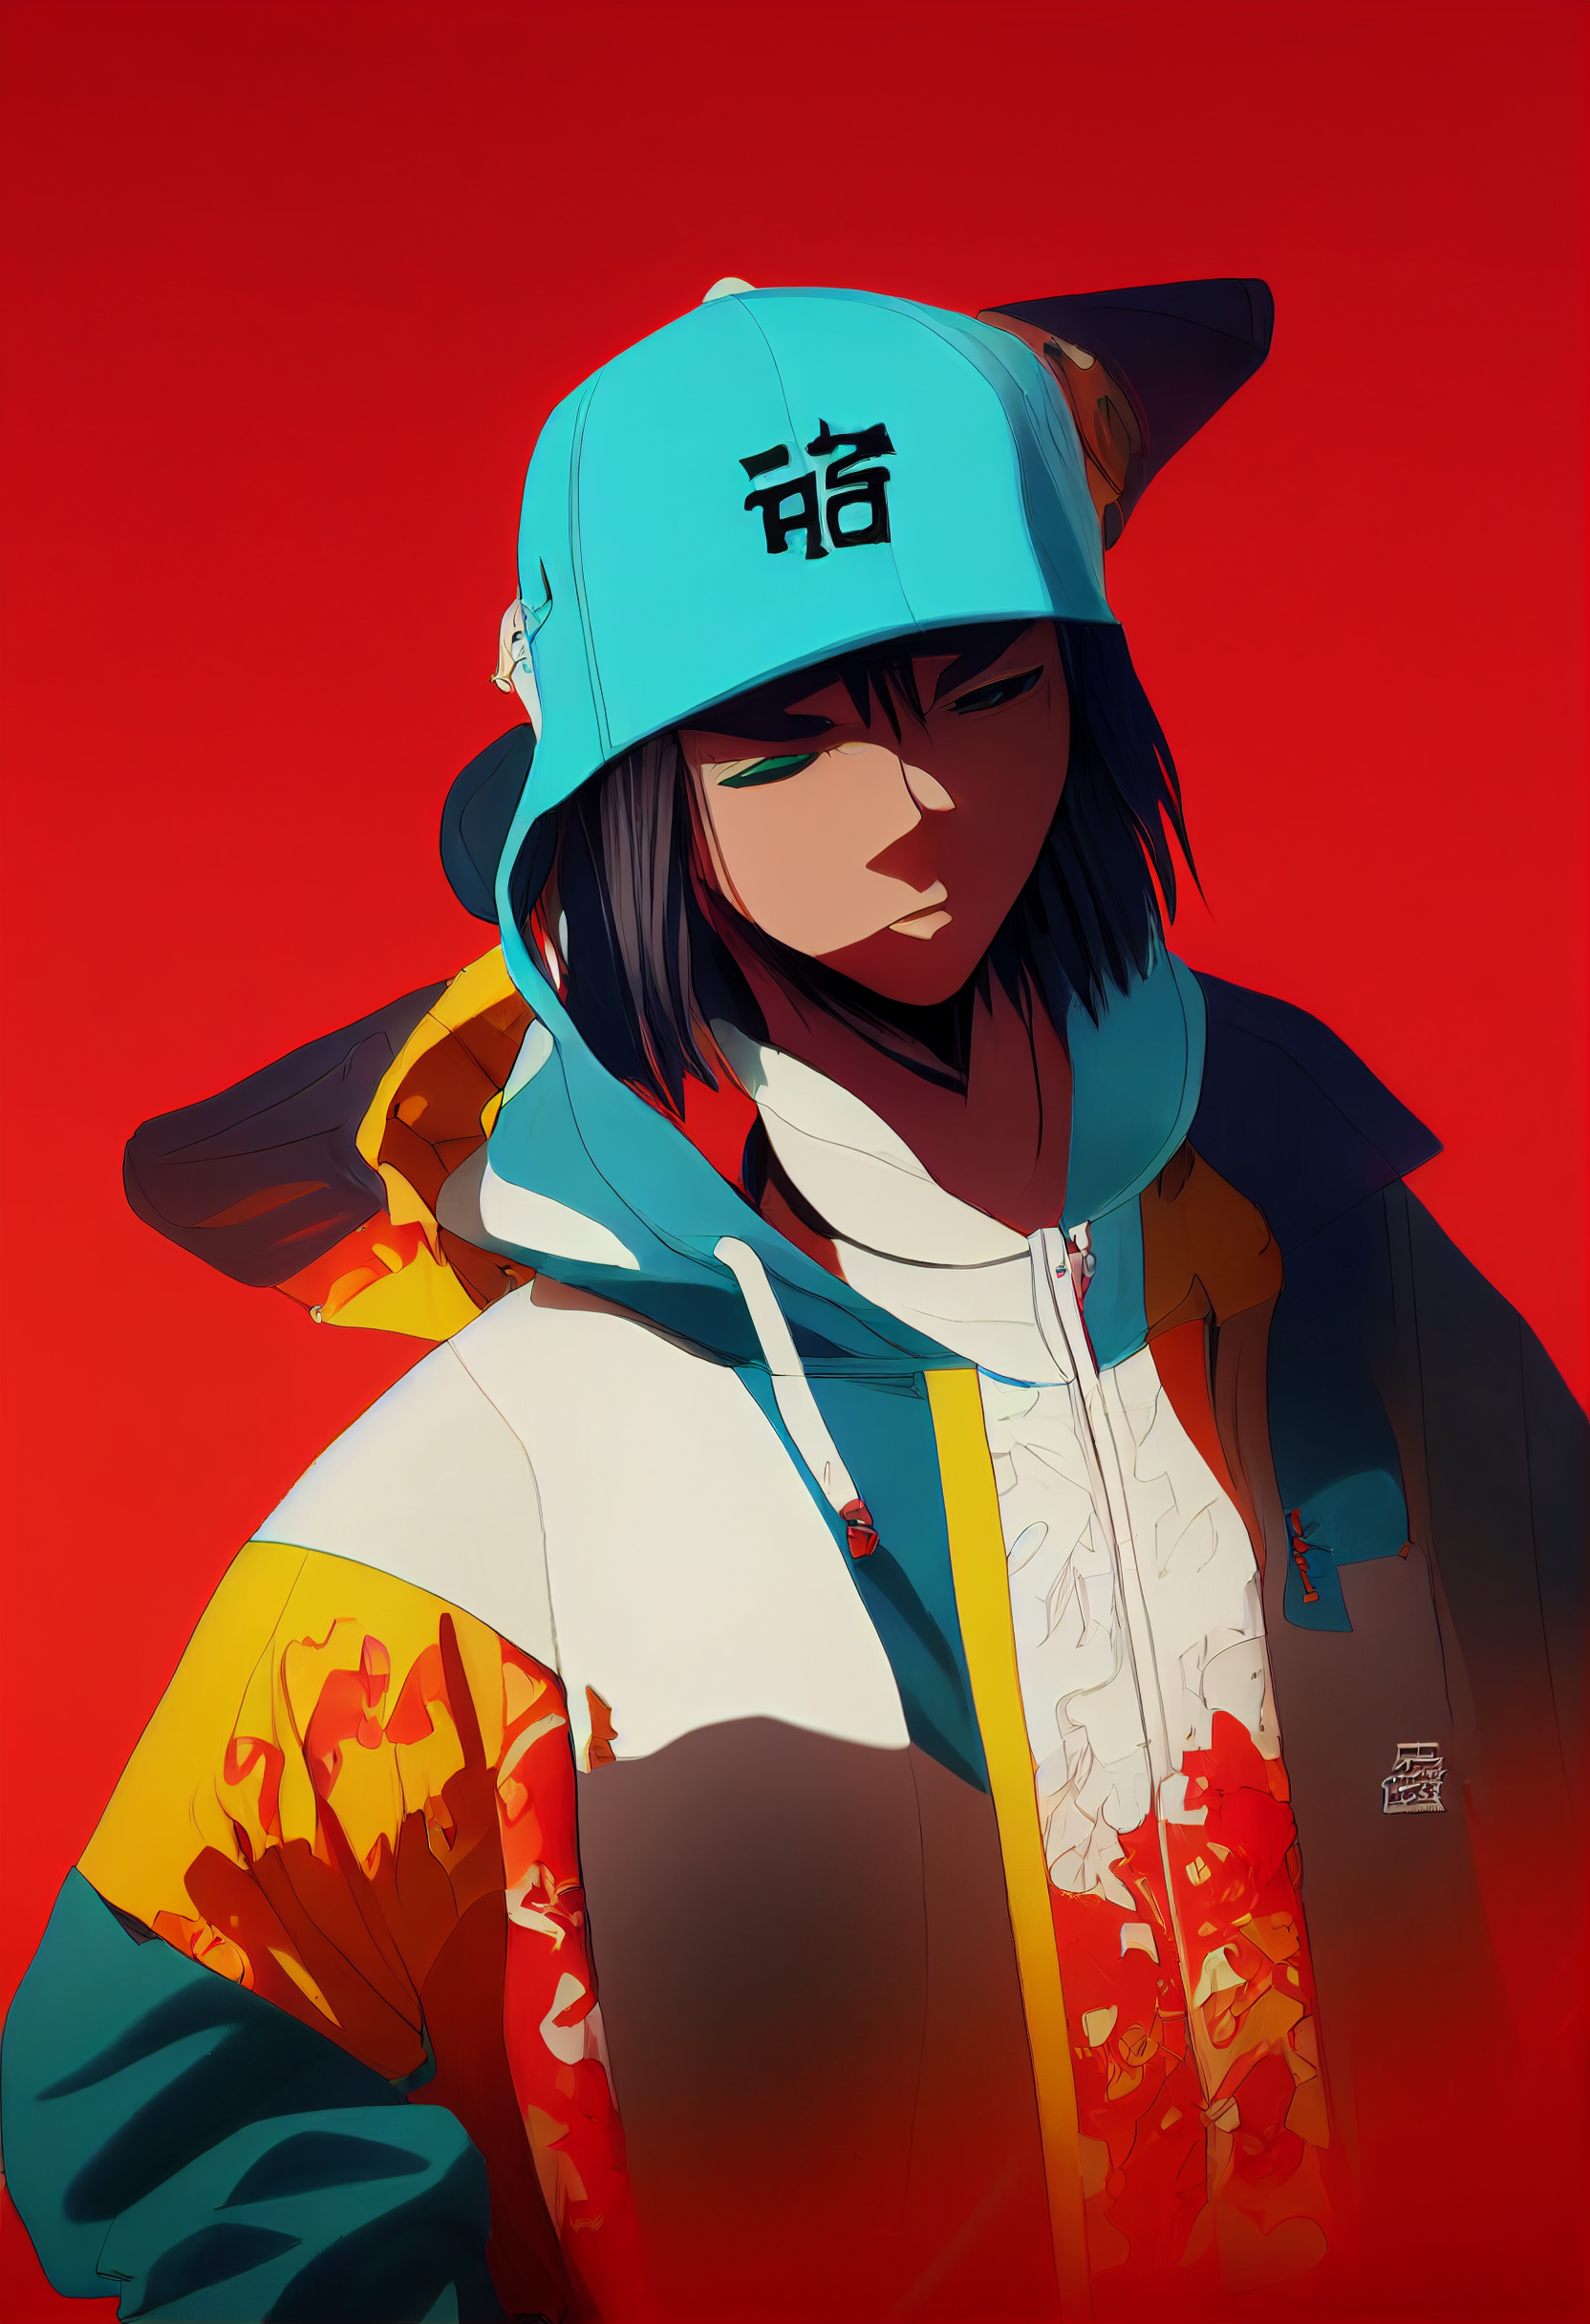 This Artist Reimagines Your Favorite Anime Characters In Streetwear Clothing